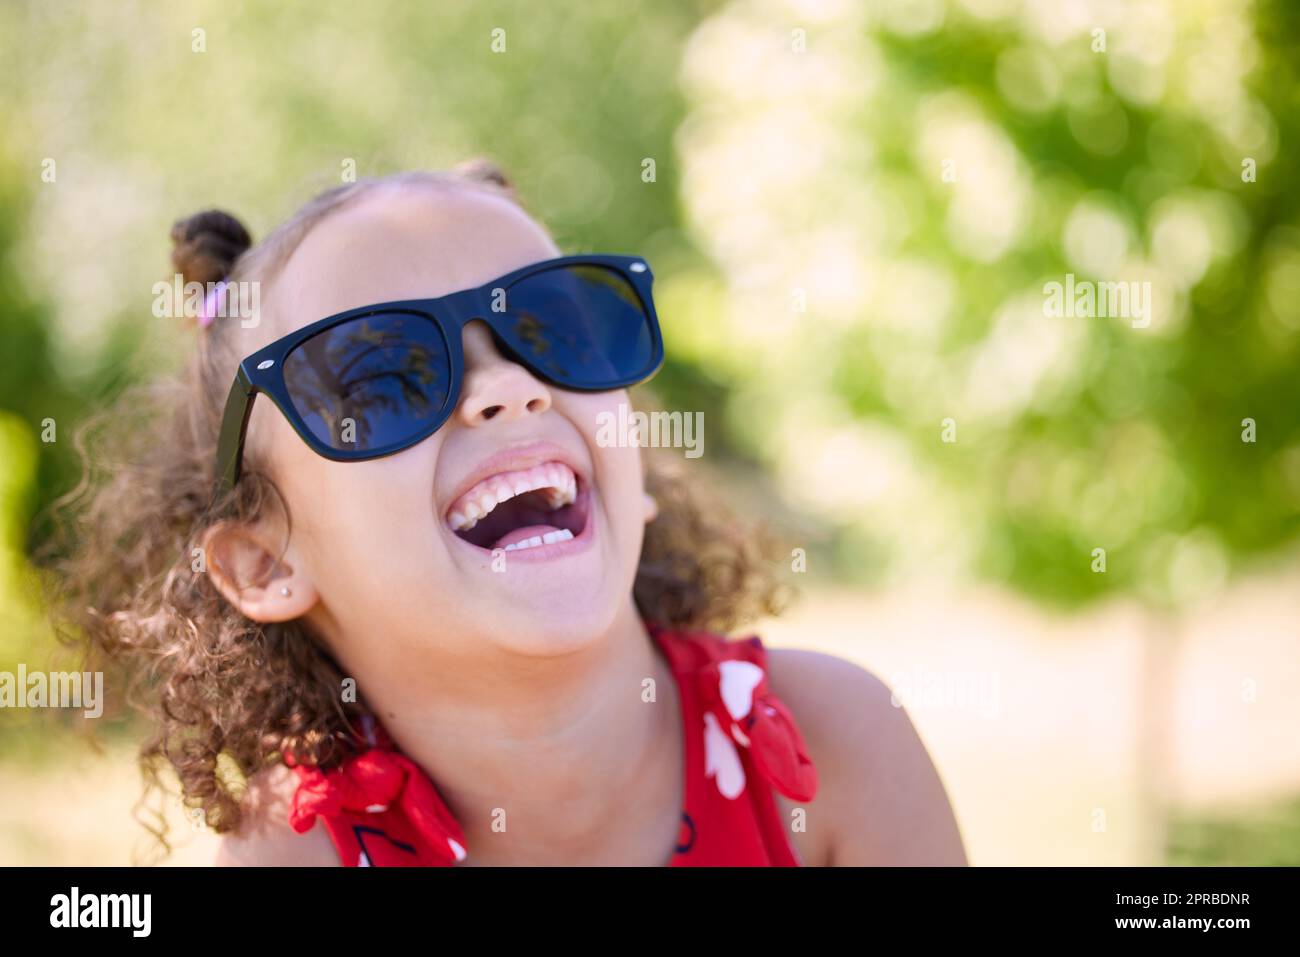 Youll find me having fun on the sunny side. an adorable little girl wearing sunglasses while at the park. Stock Photo